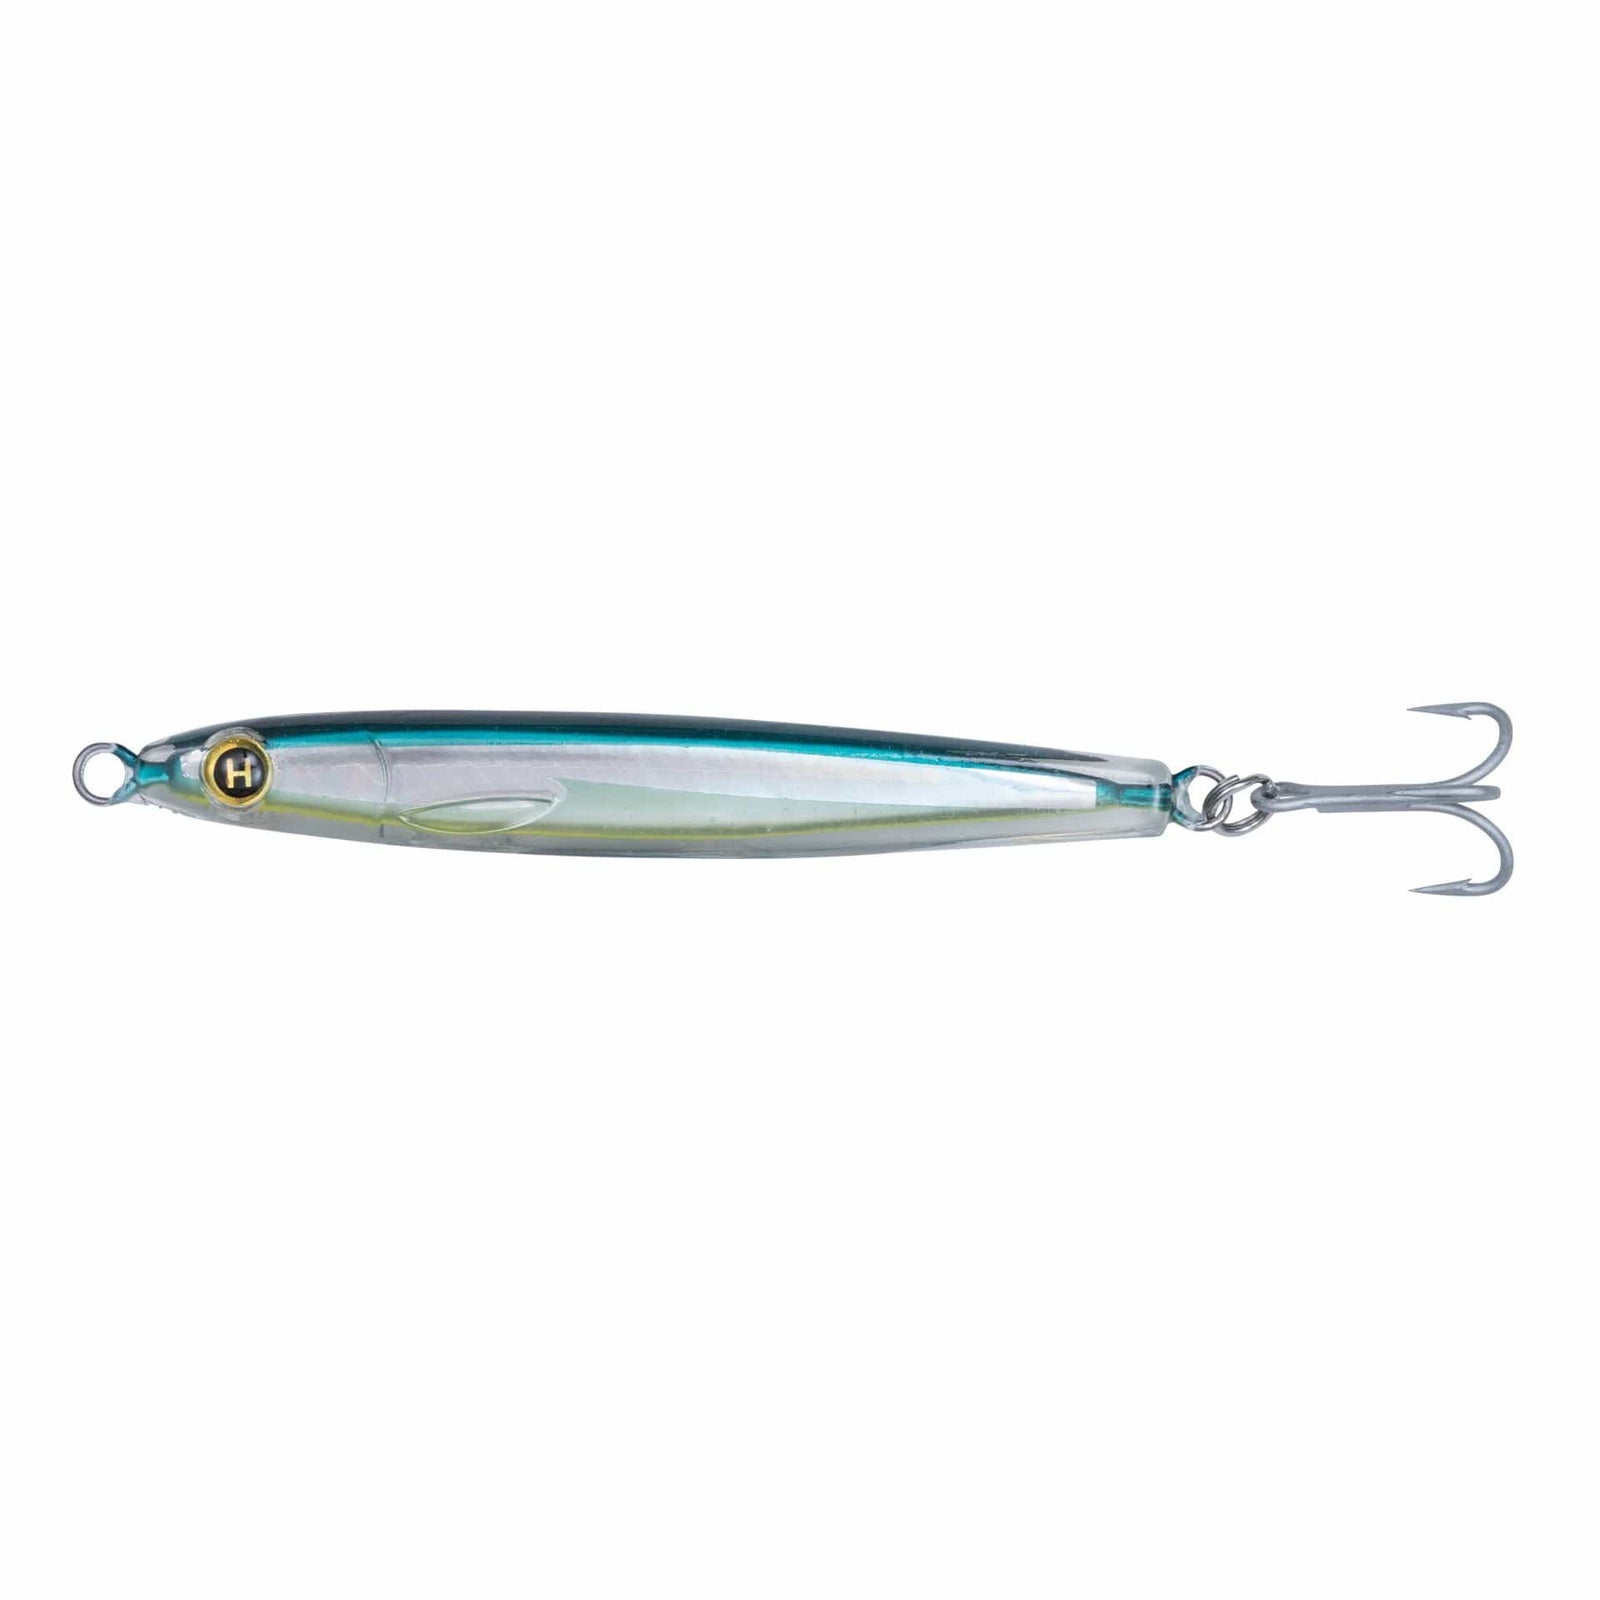 On Sale Lures - The Saltwater Edge